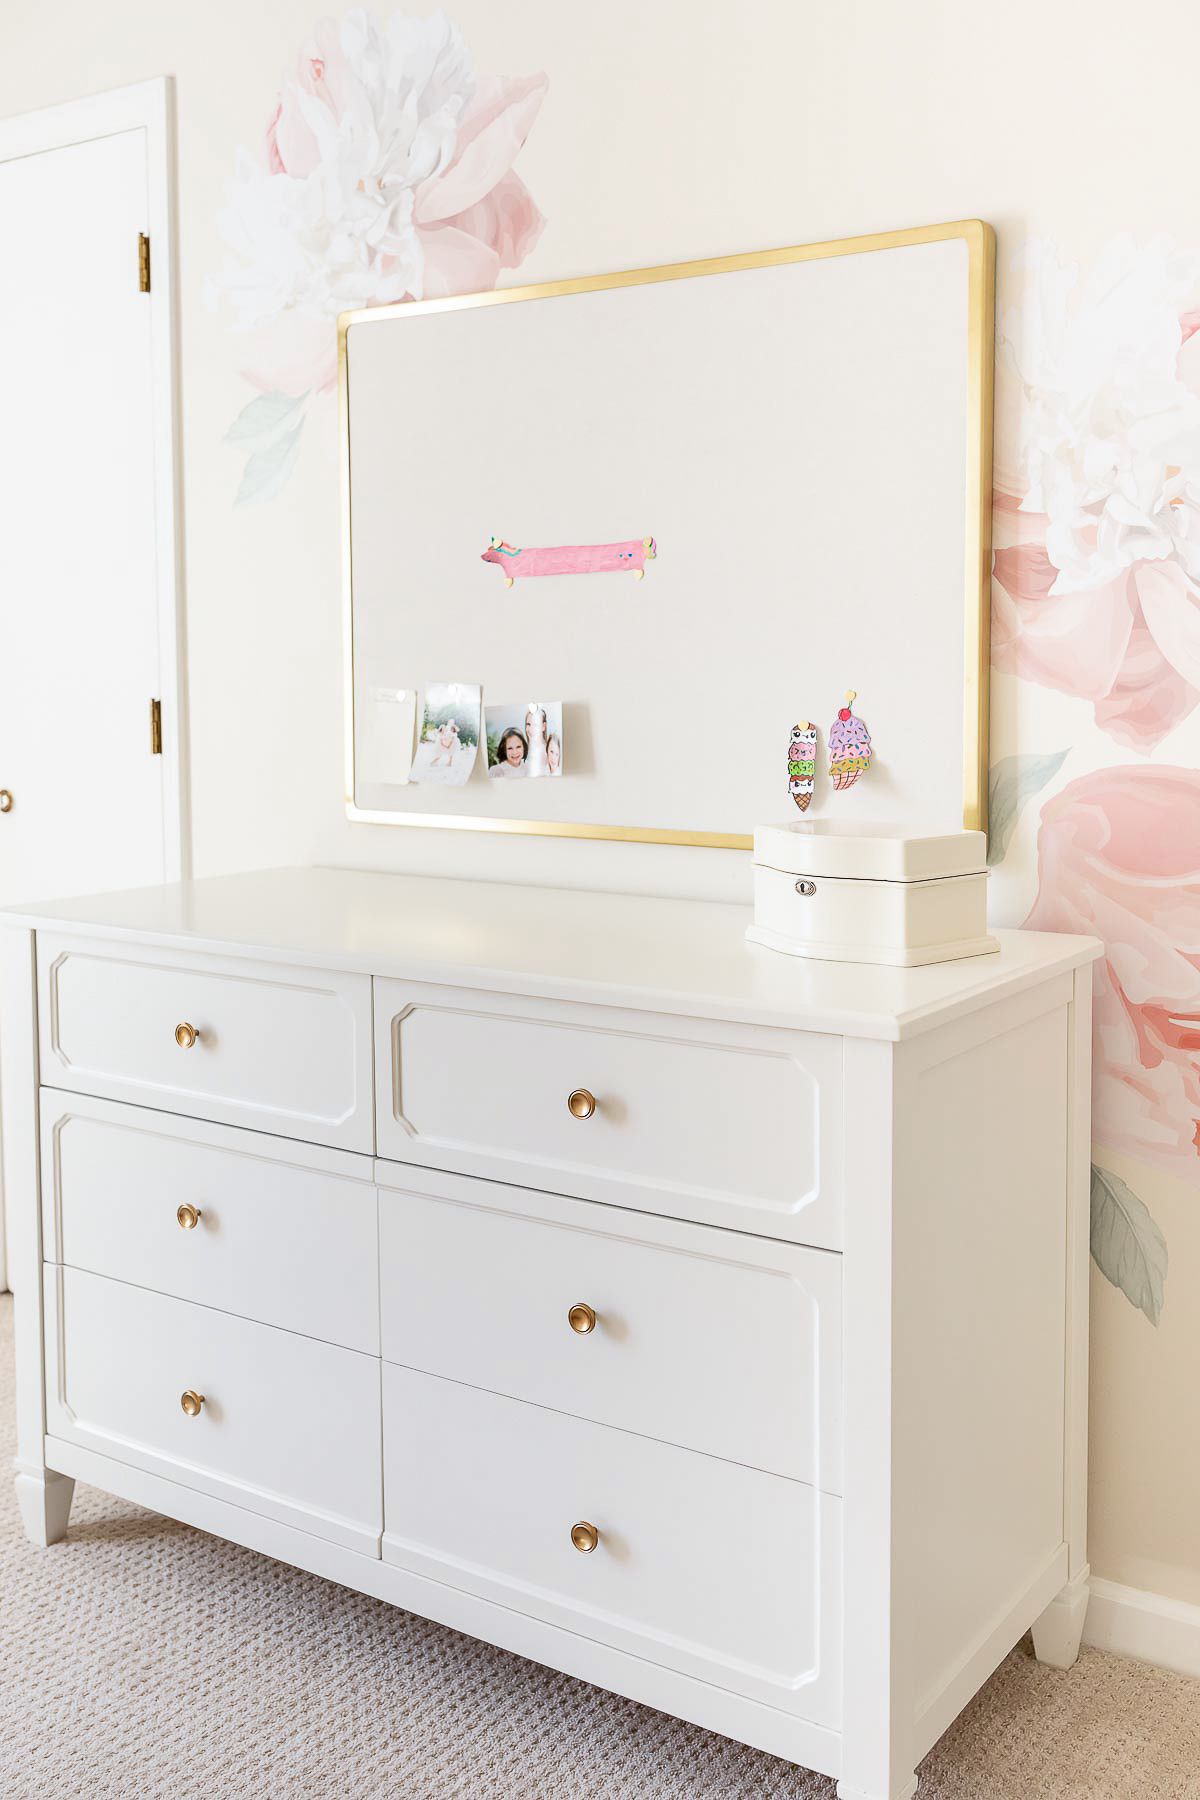 A girl's bedroom with cream walls and peony flower wallpaper behind a white dresser.